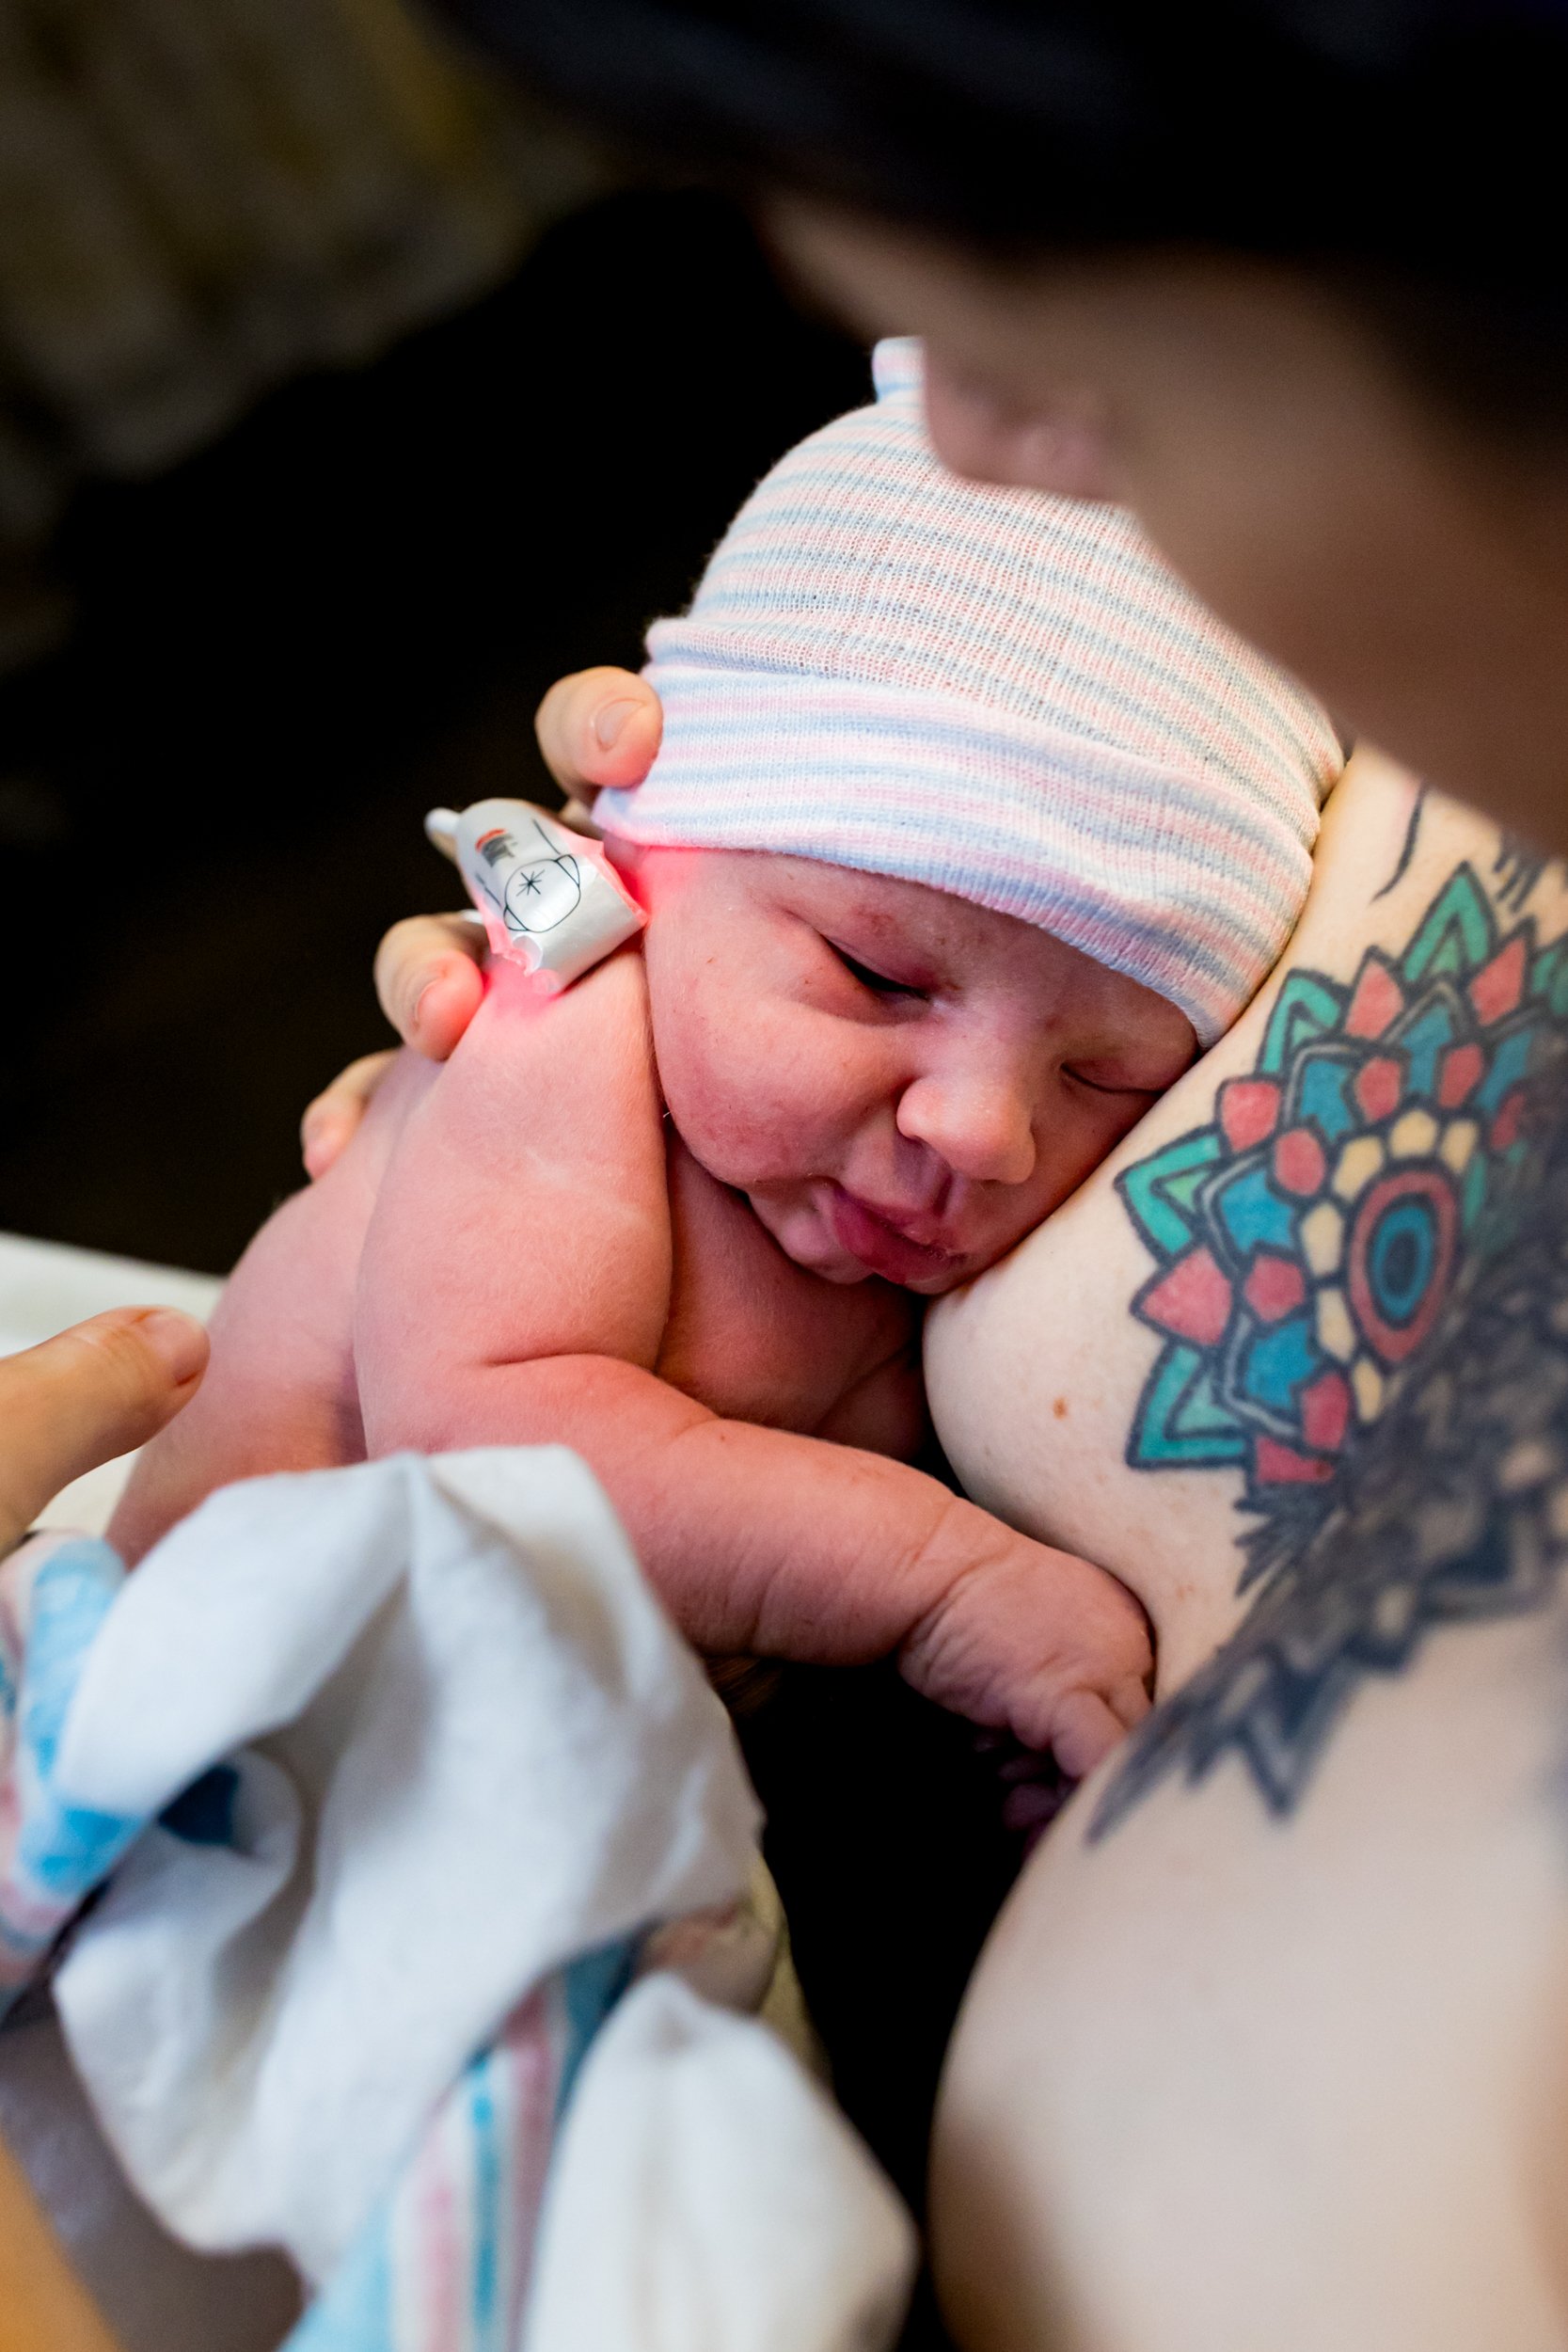 Jacksonville baby doing skin-to-skin with mom just after birth